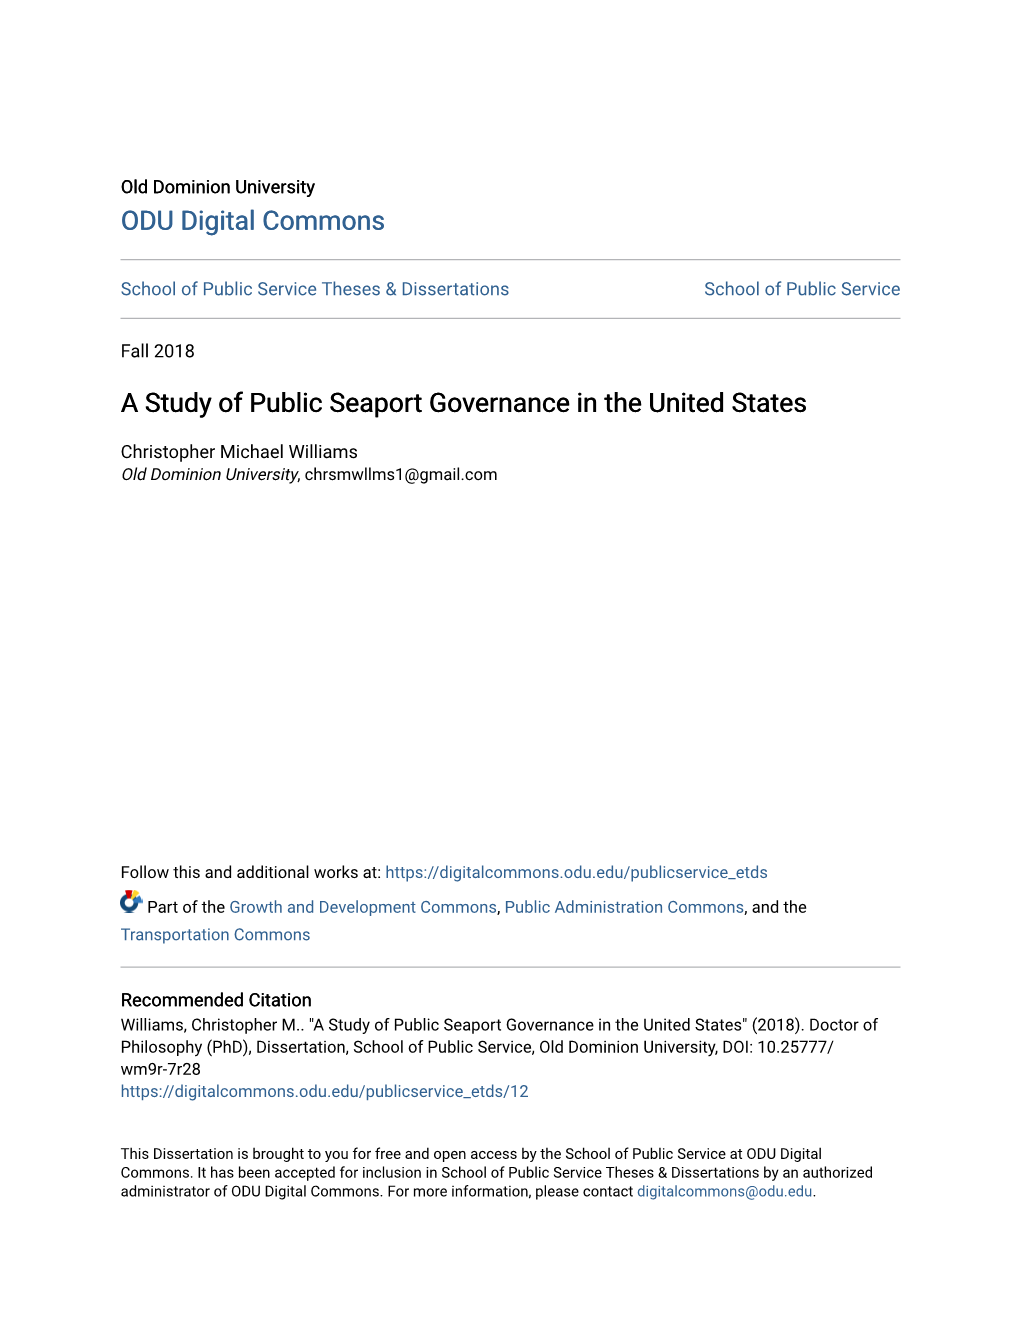 A Study of Public Seaport Governance in the United States